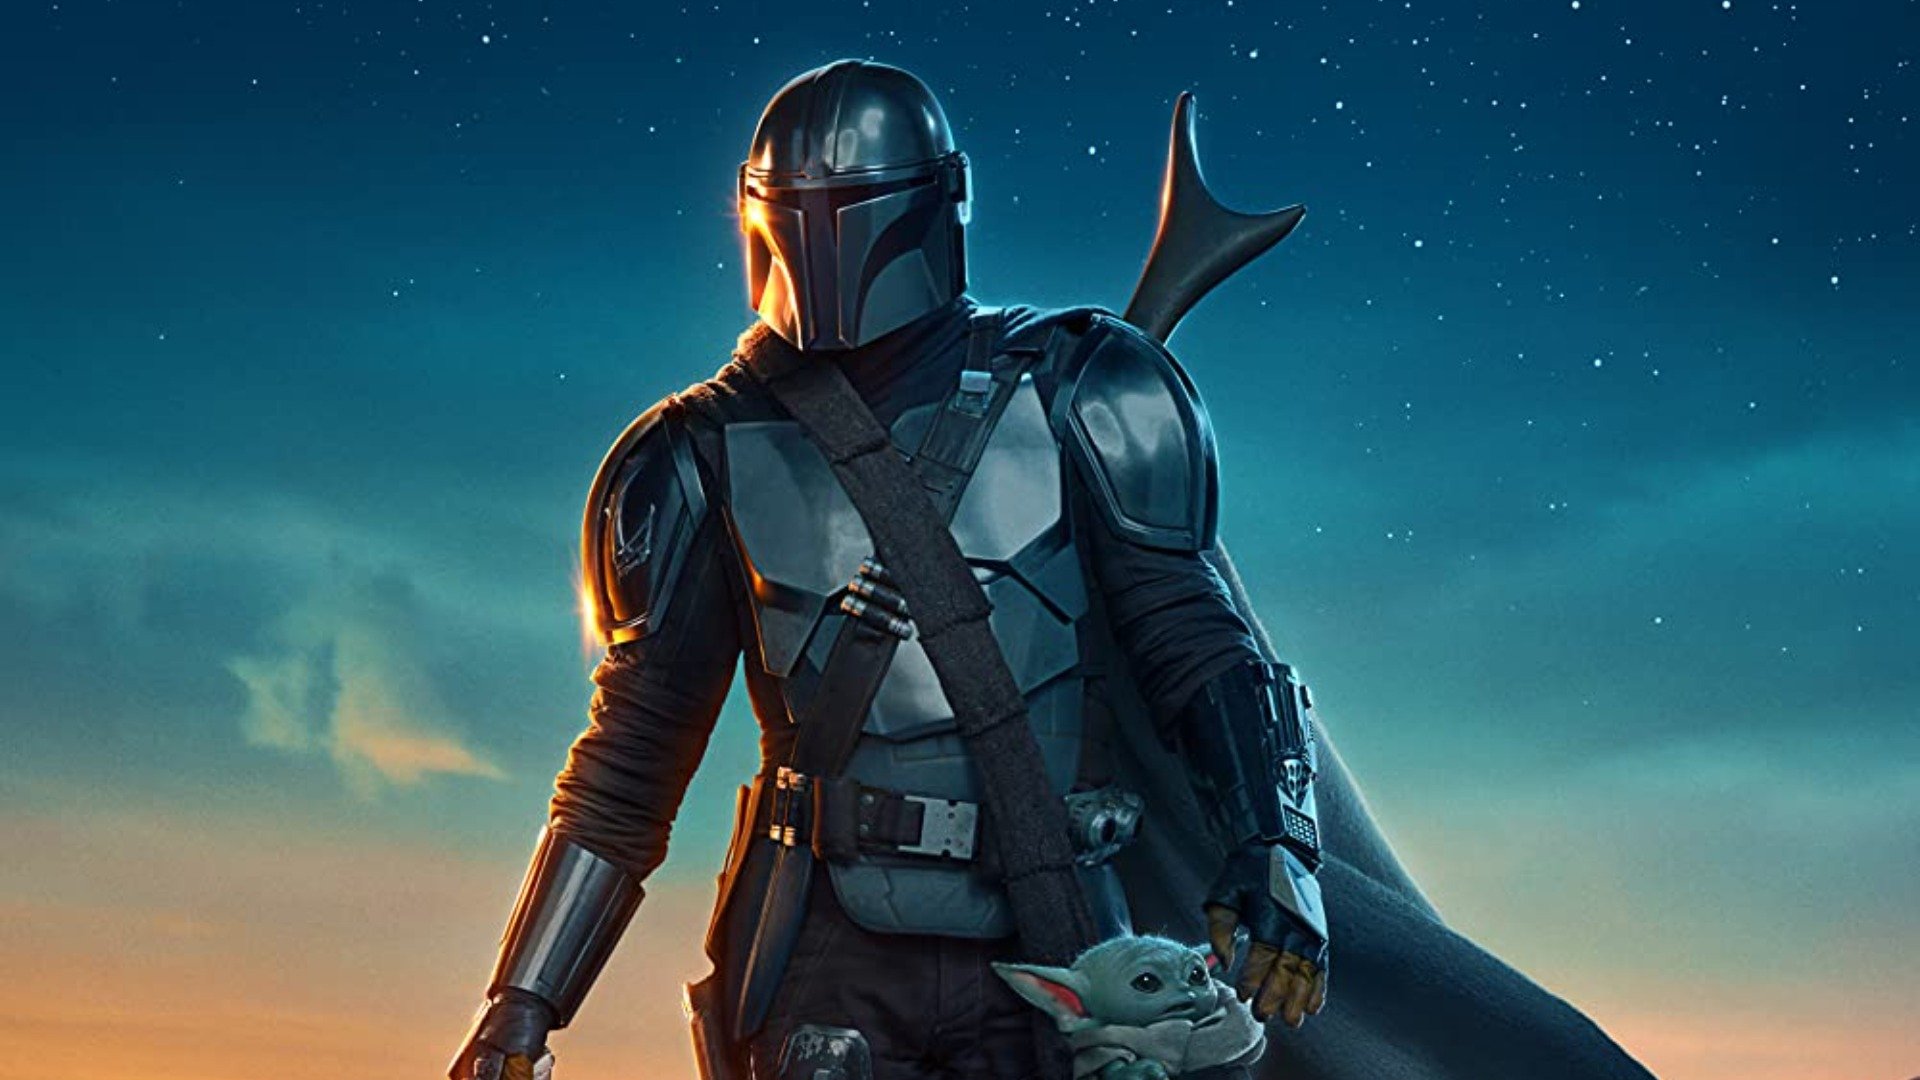 The Mandalorian' Is Untouchable as Disney Plus' Most Streamed Series, New  Analysis Shows - Star Wars News Net